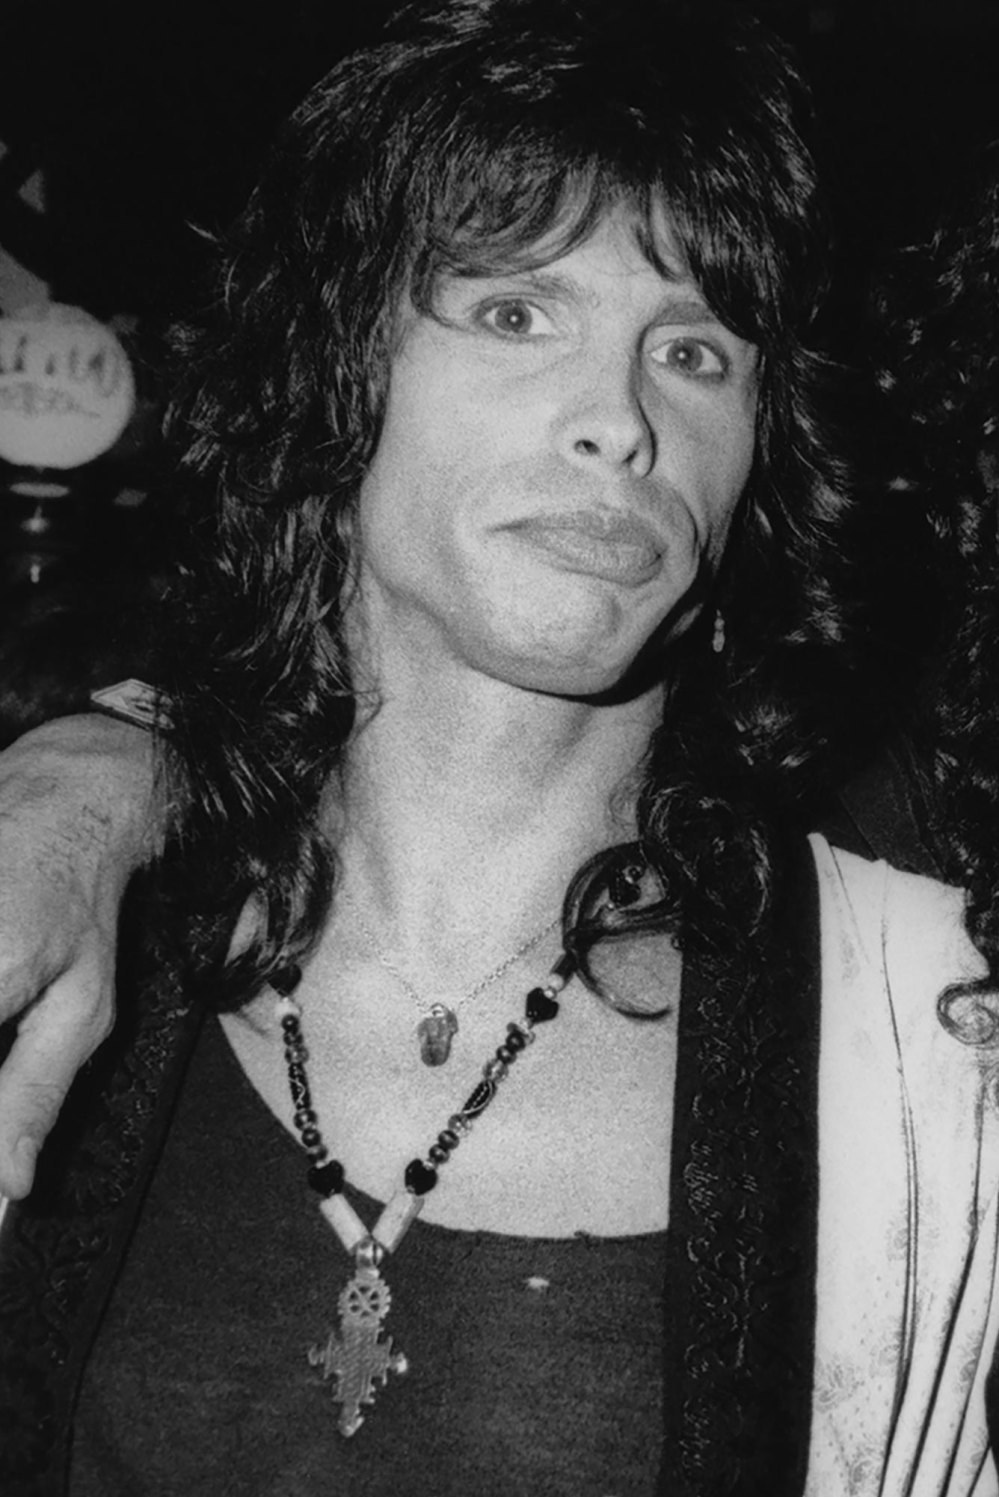 Aerosmith s Stephen Tyler Is Being Sued for Allegedly Sexually Assaulting 17-Year-Old Girl in 1975 109